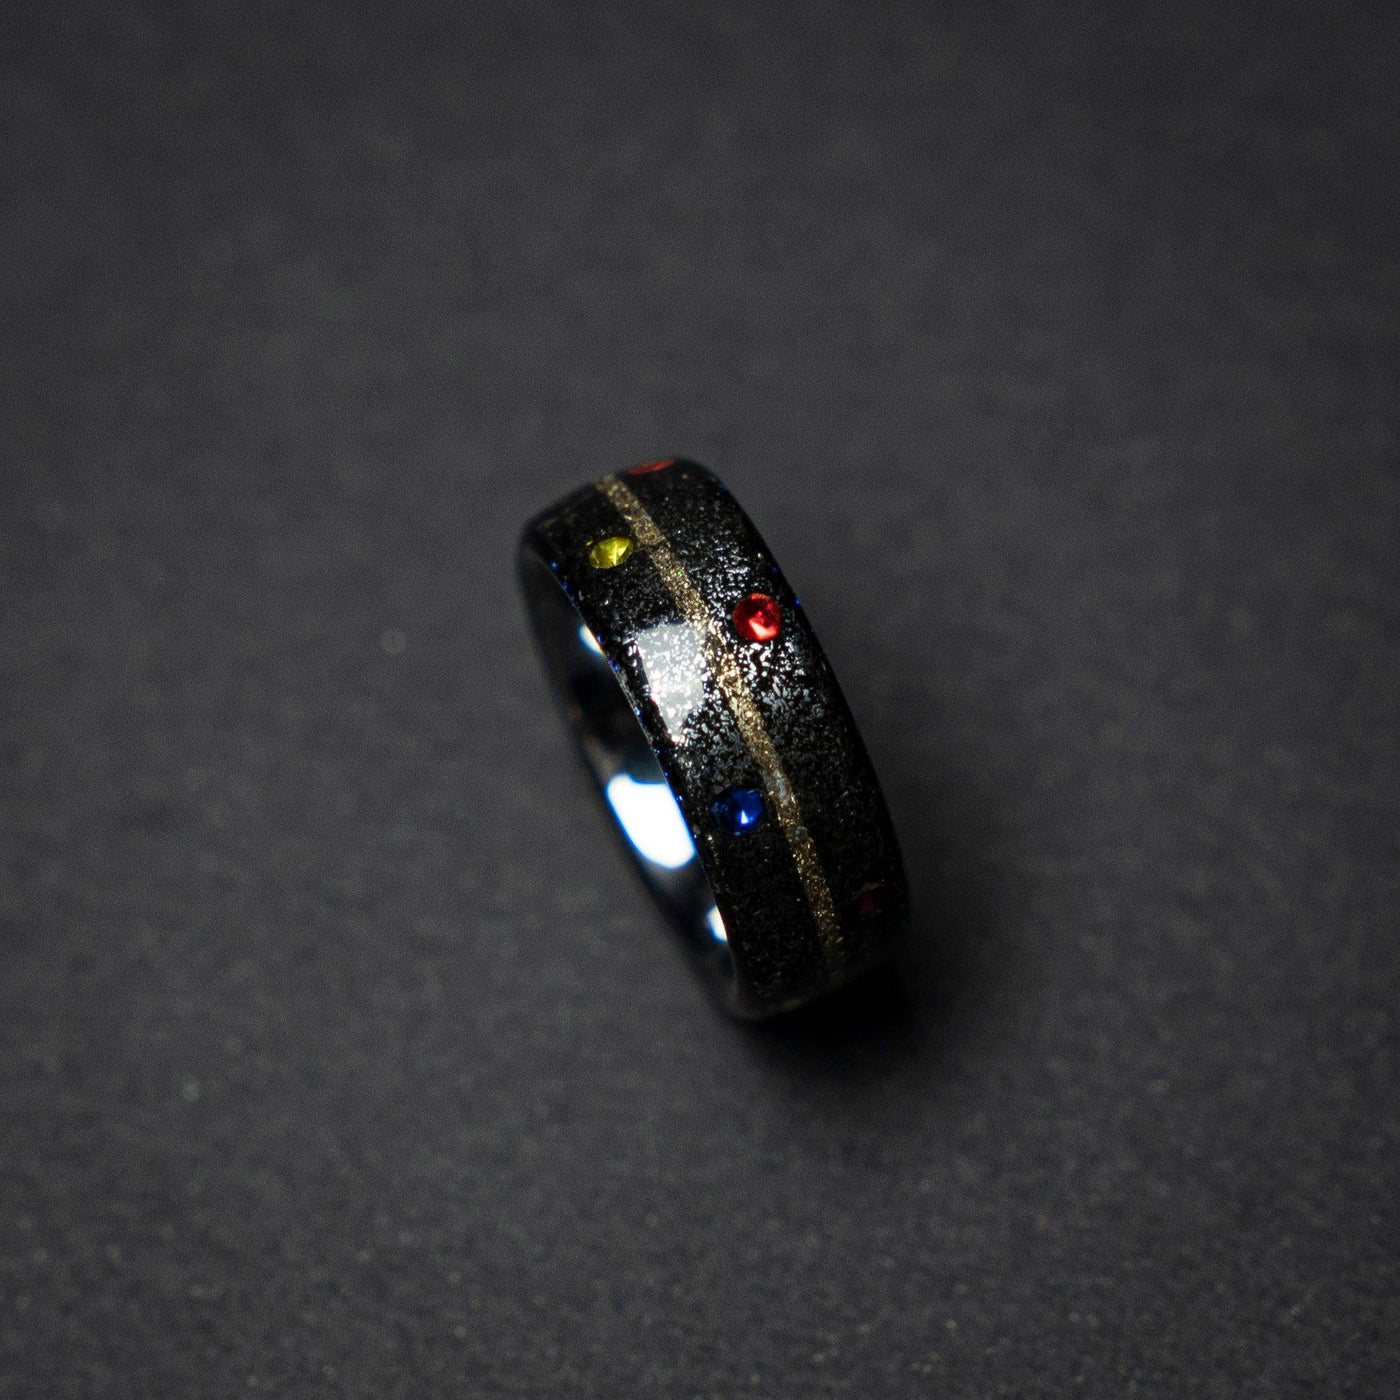 Tungsten ring core with meteorite and the six infinity stones